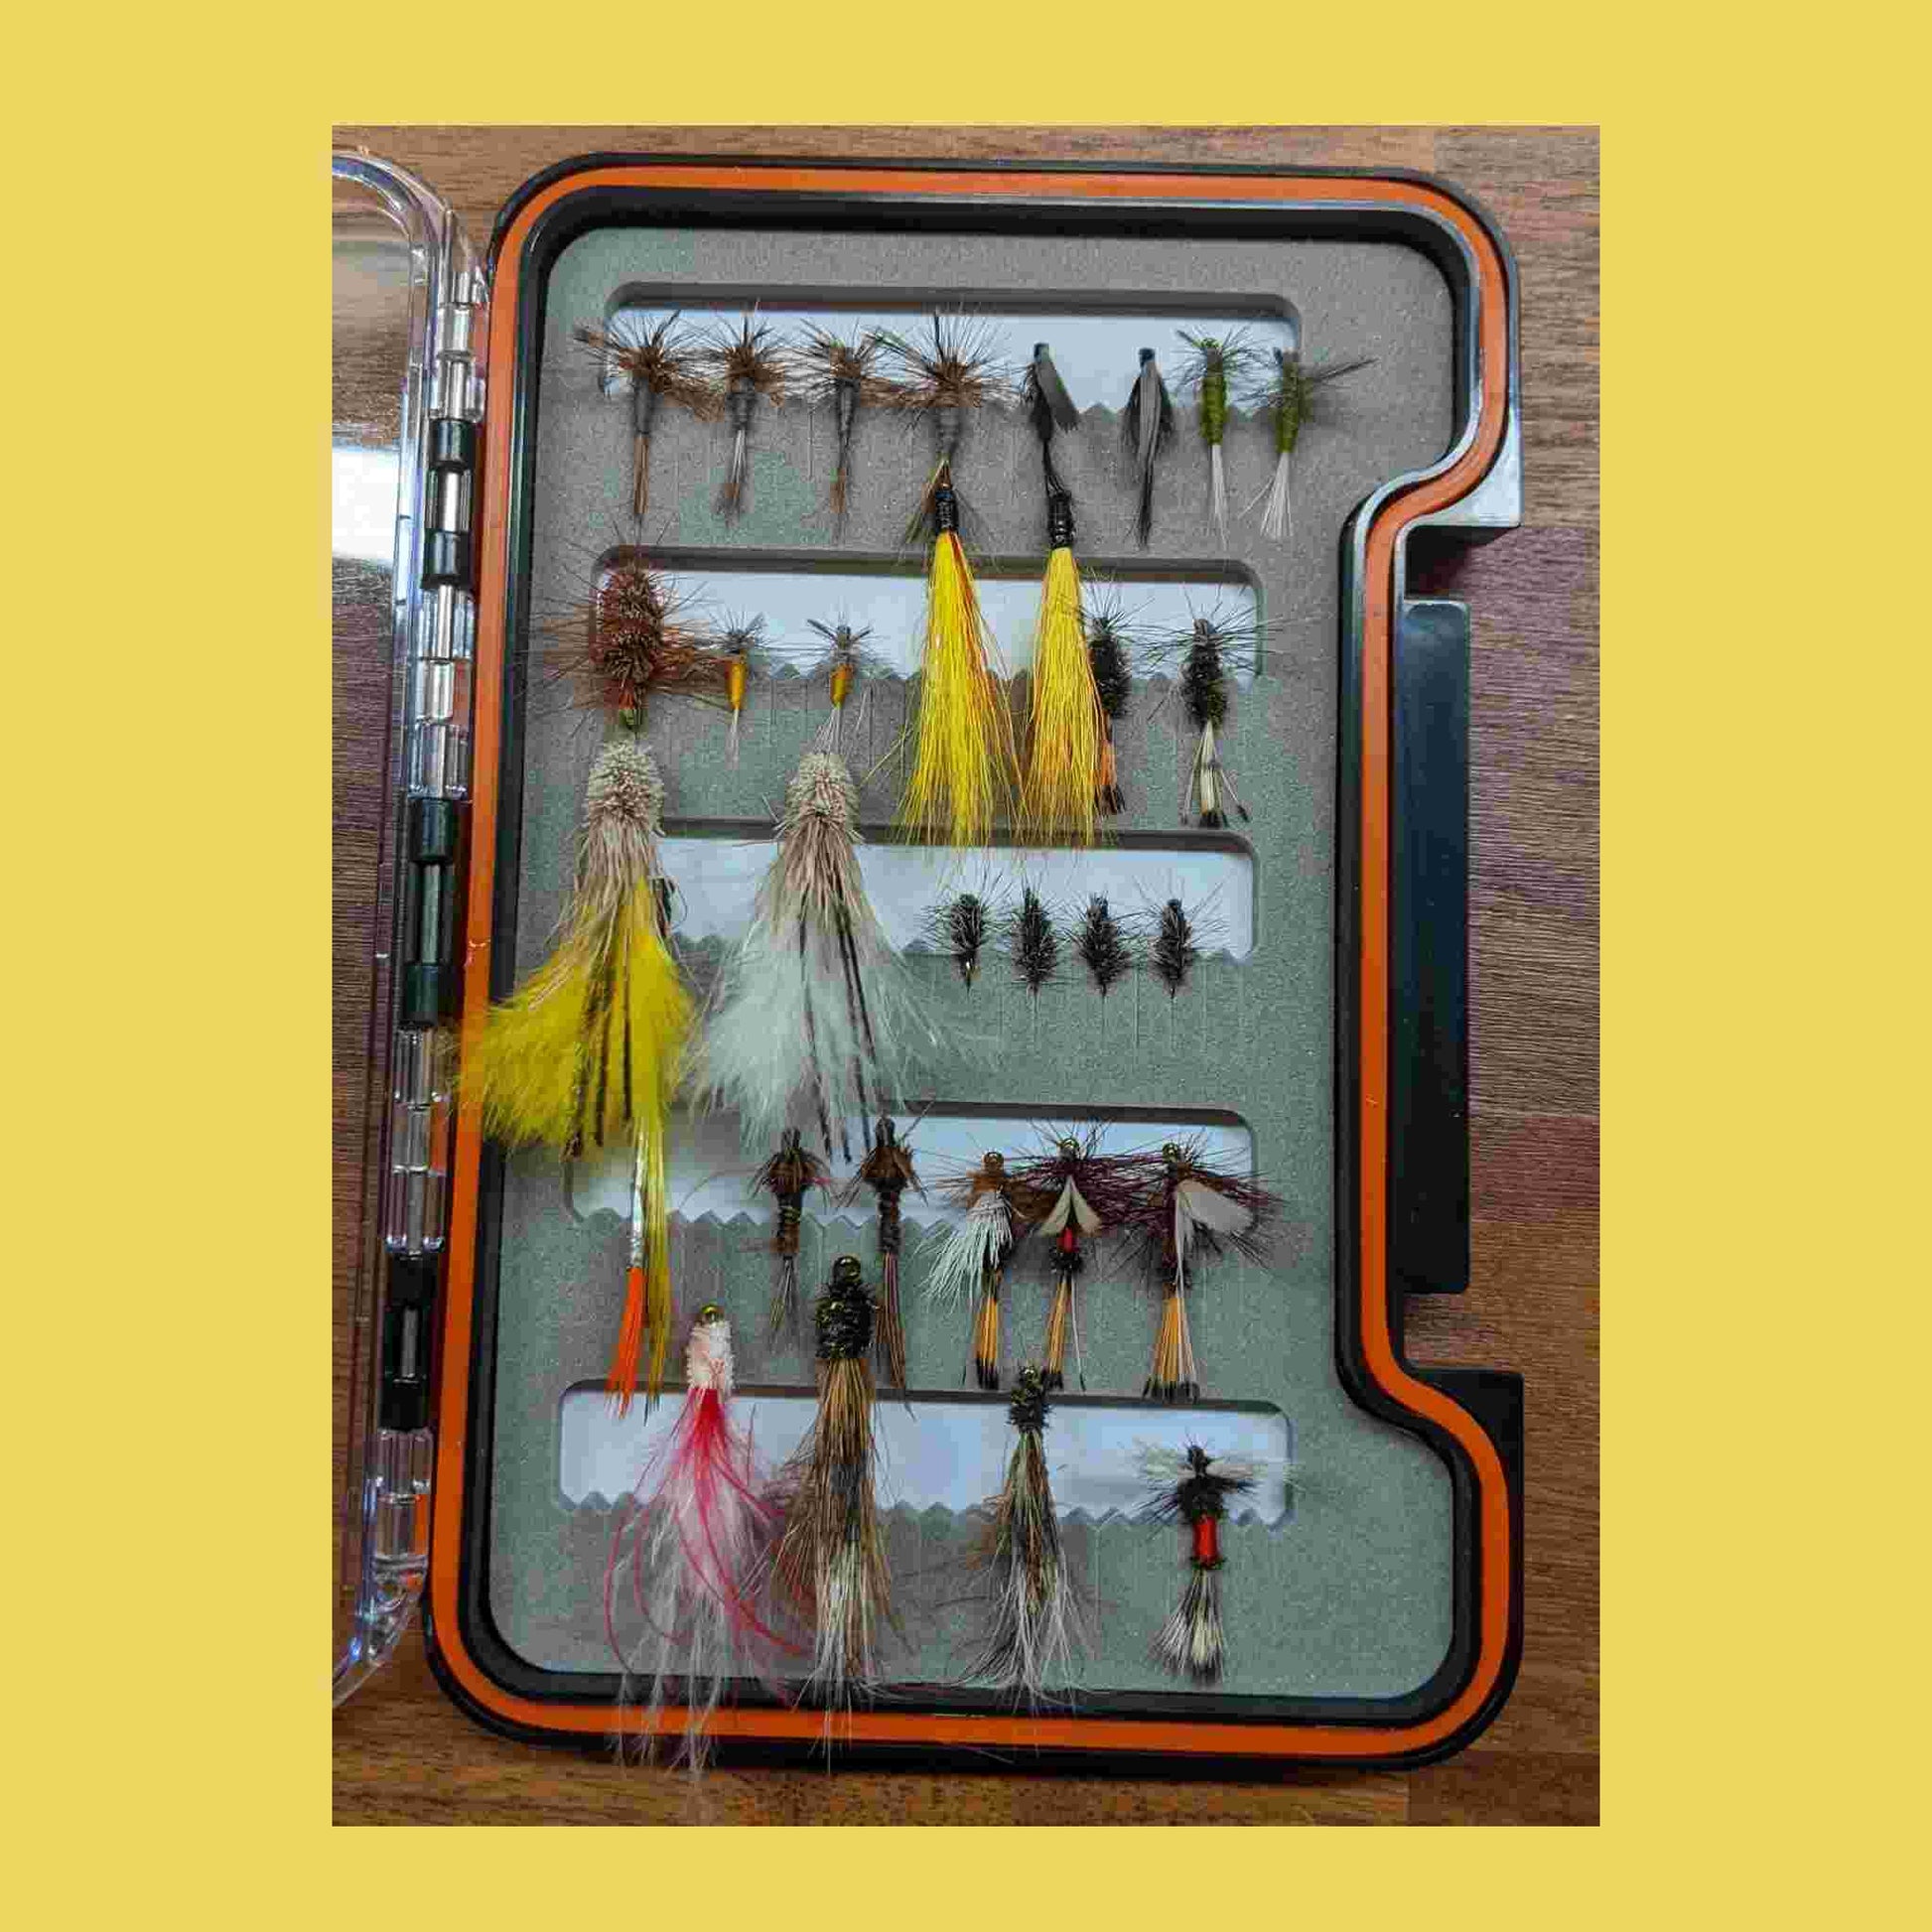 Atlantic Canada Trout Pack – Highland River Flies